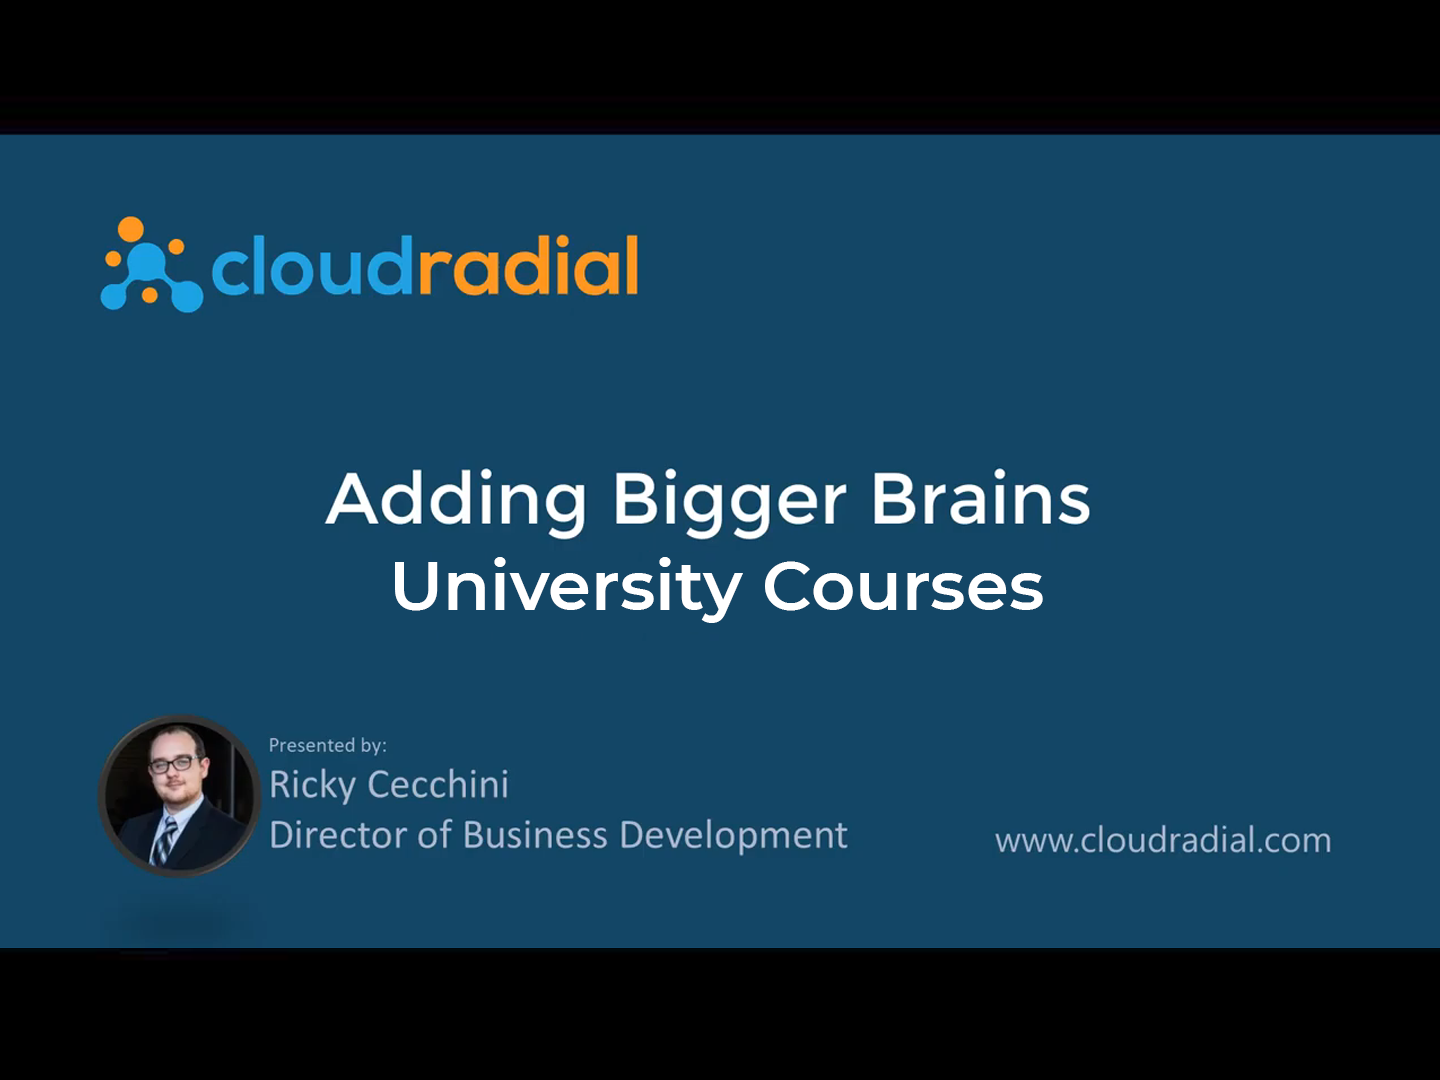 Adding Bigger Brains University Courses to CloudRadial